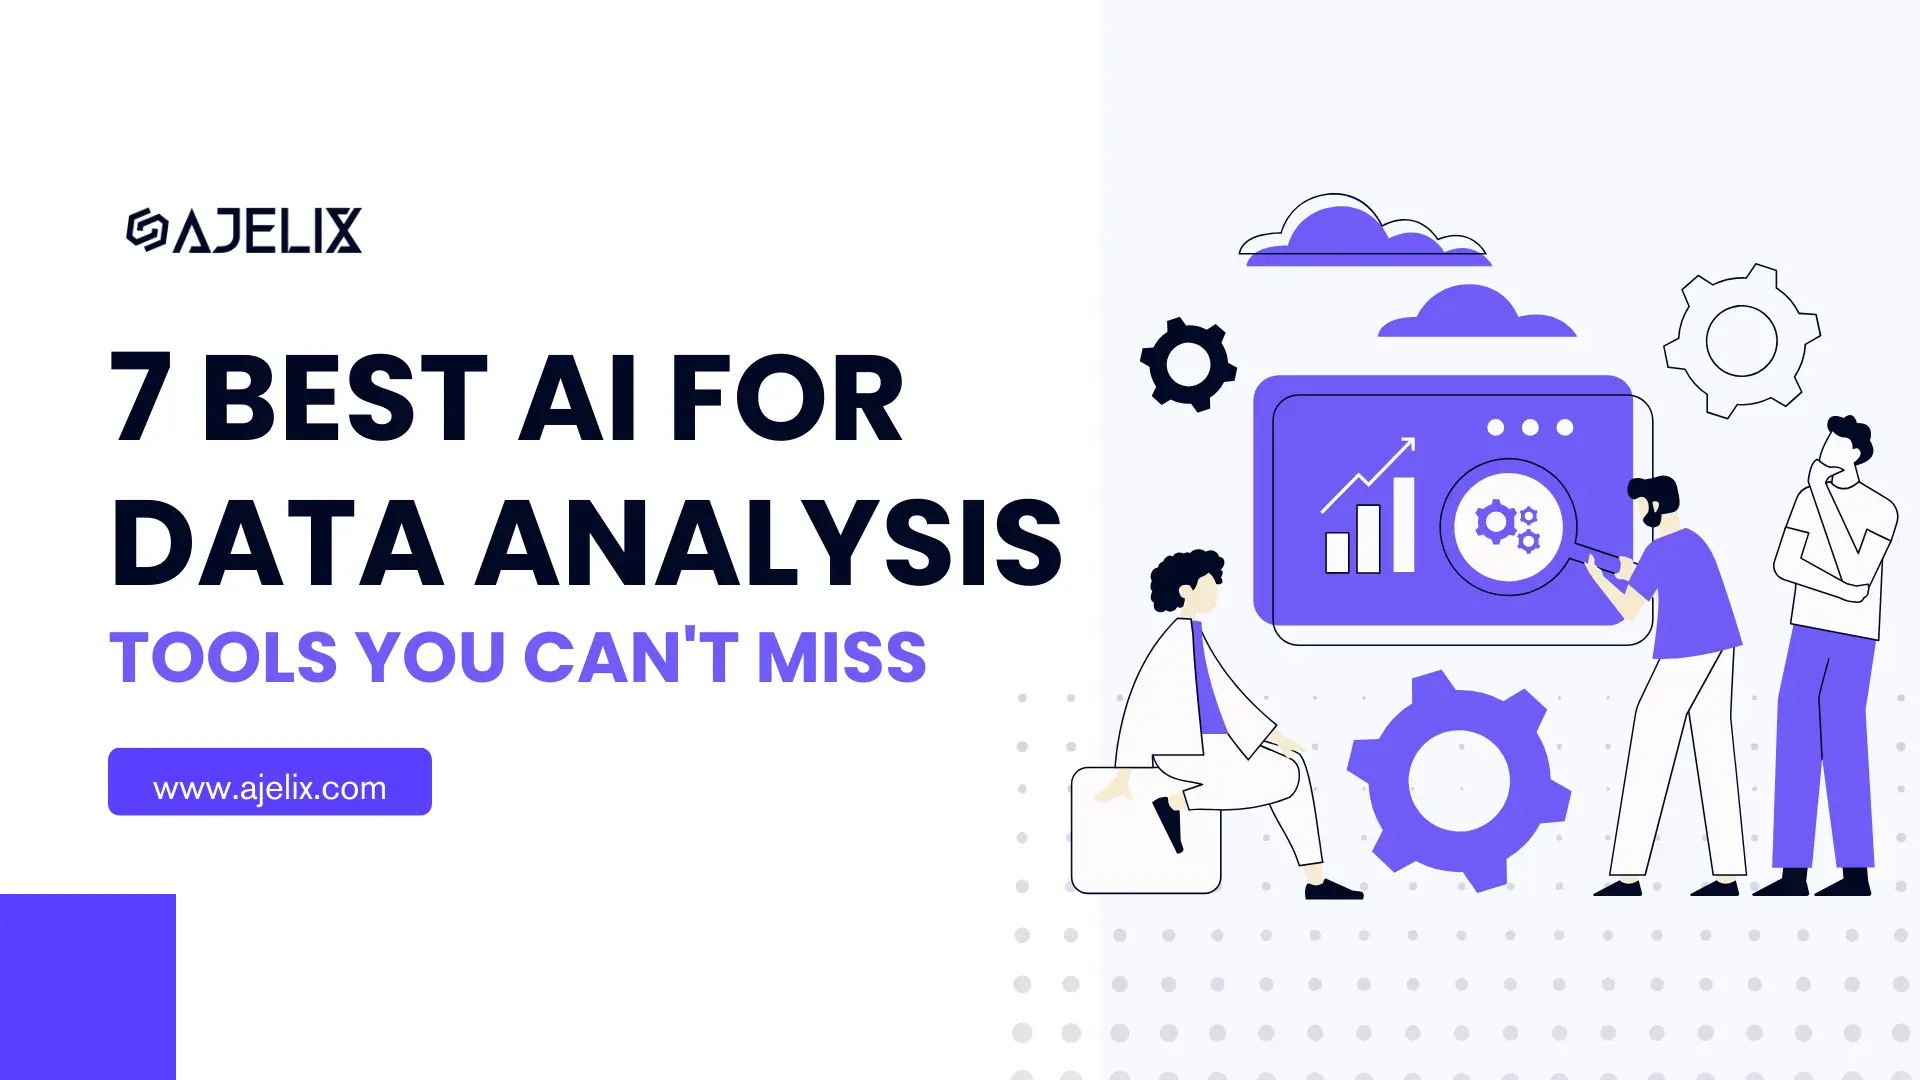 7 Best AI For Data Analysis: Tools You Can’t Miss